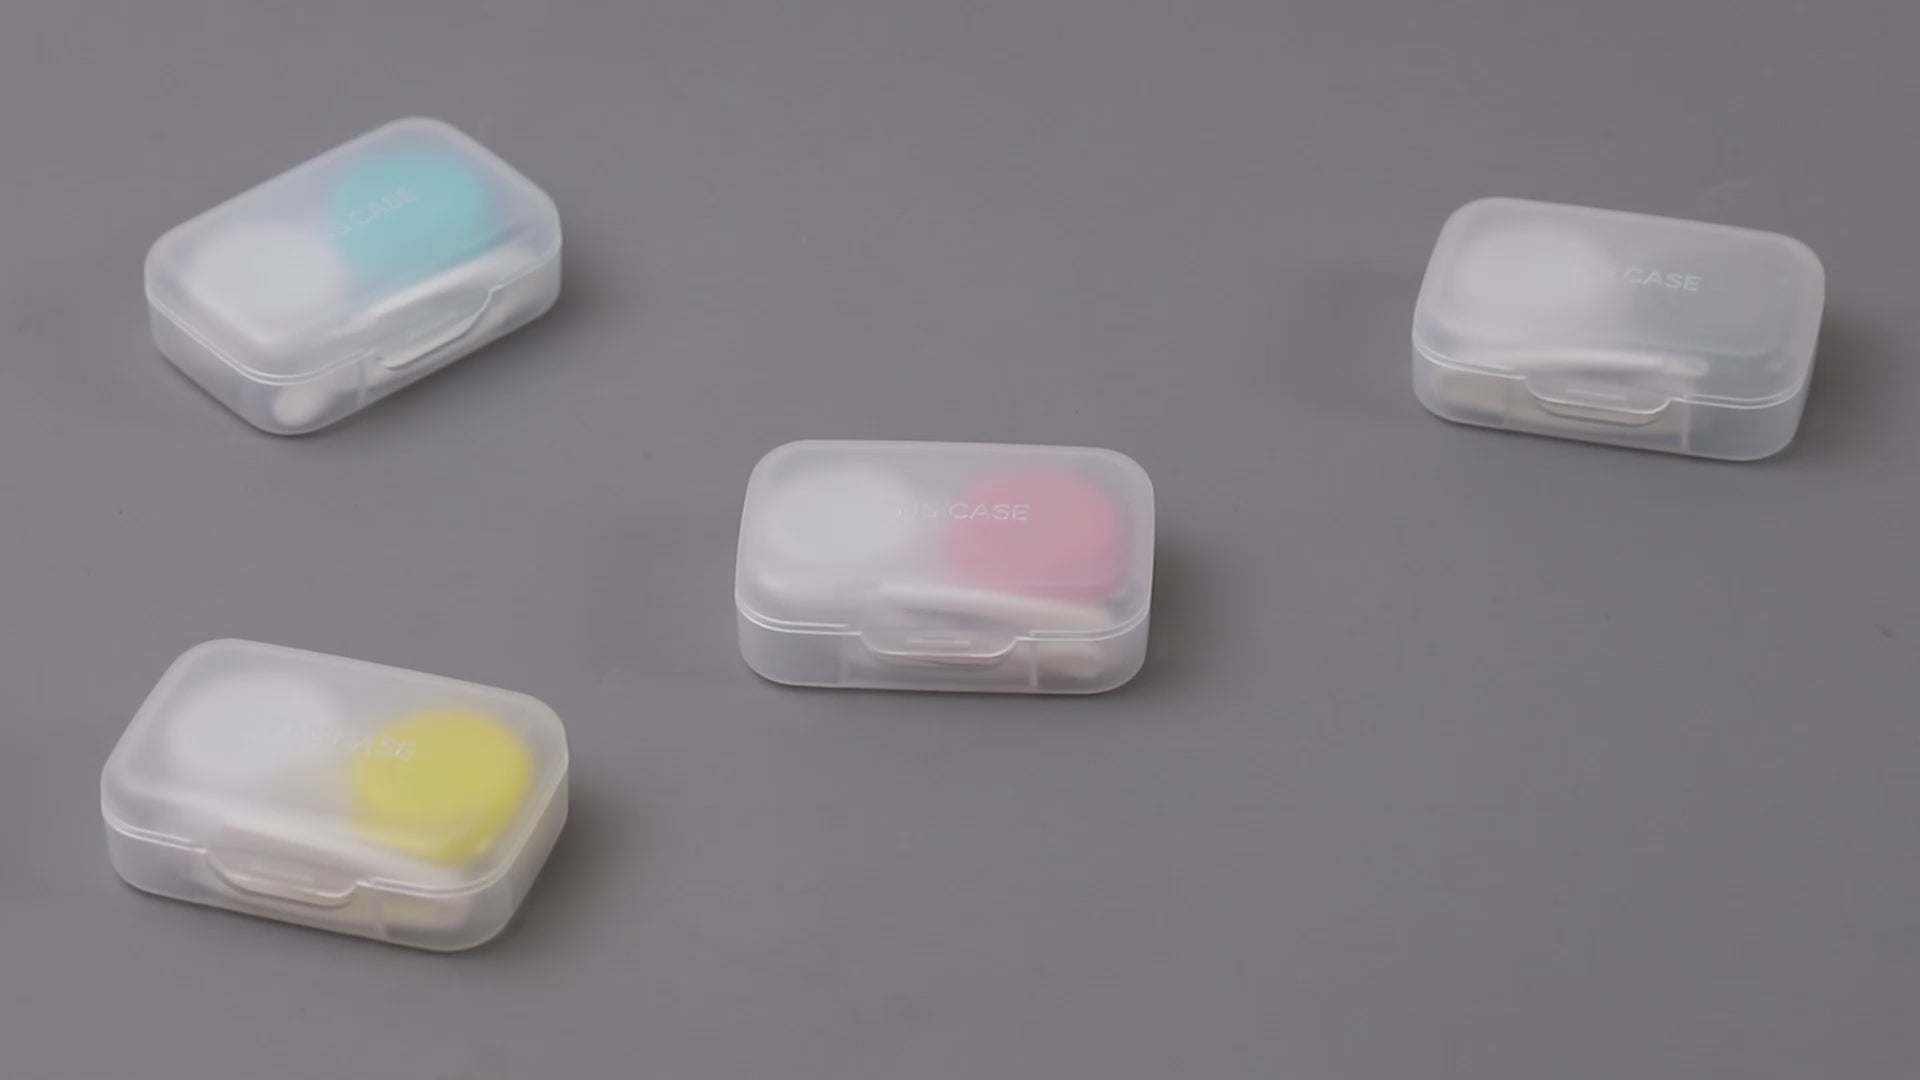 Product video presenting contact lens case 4 colors with case, tweezers & applicator.  